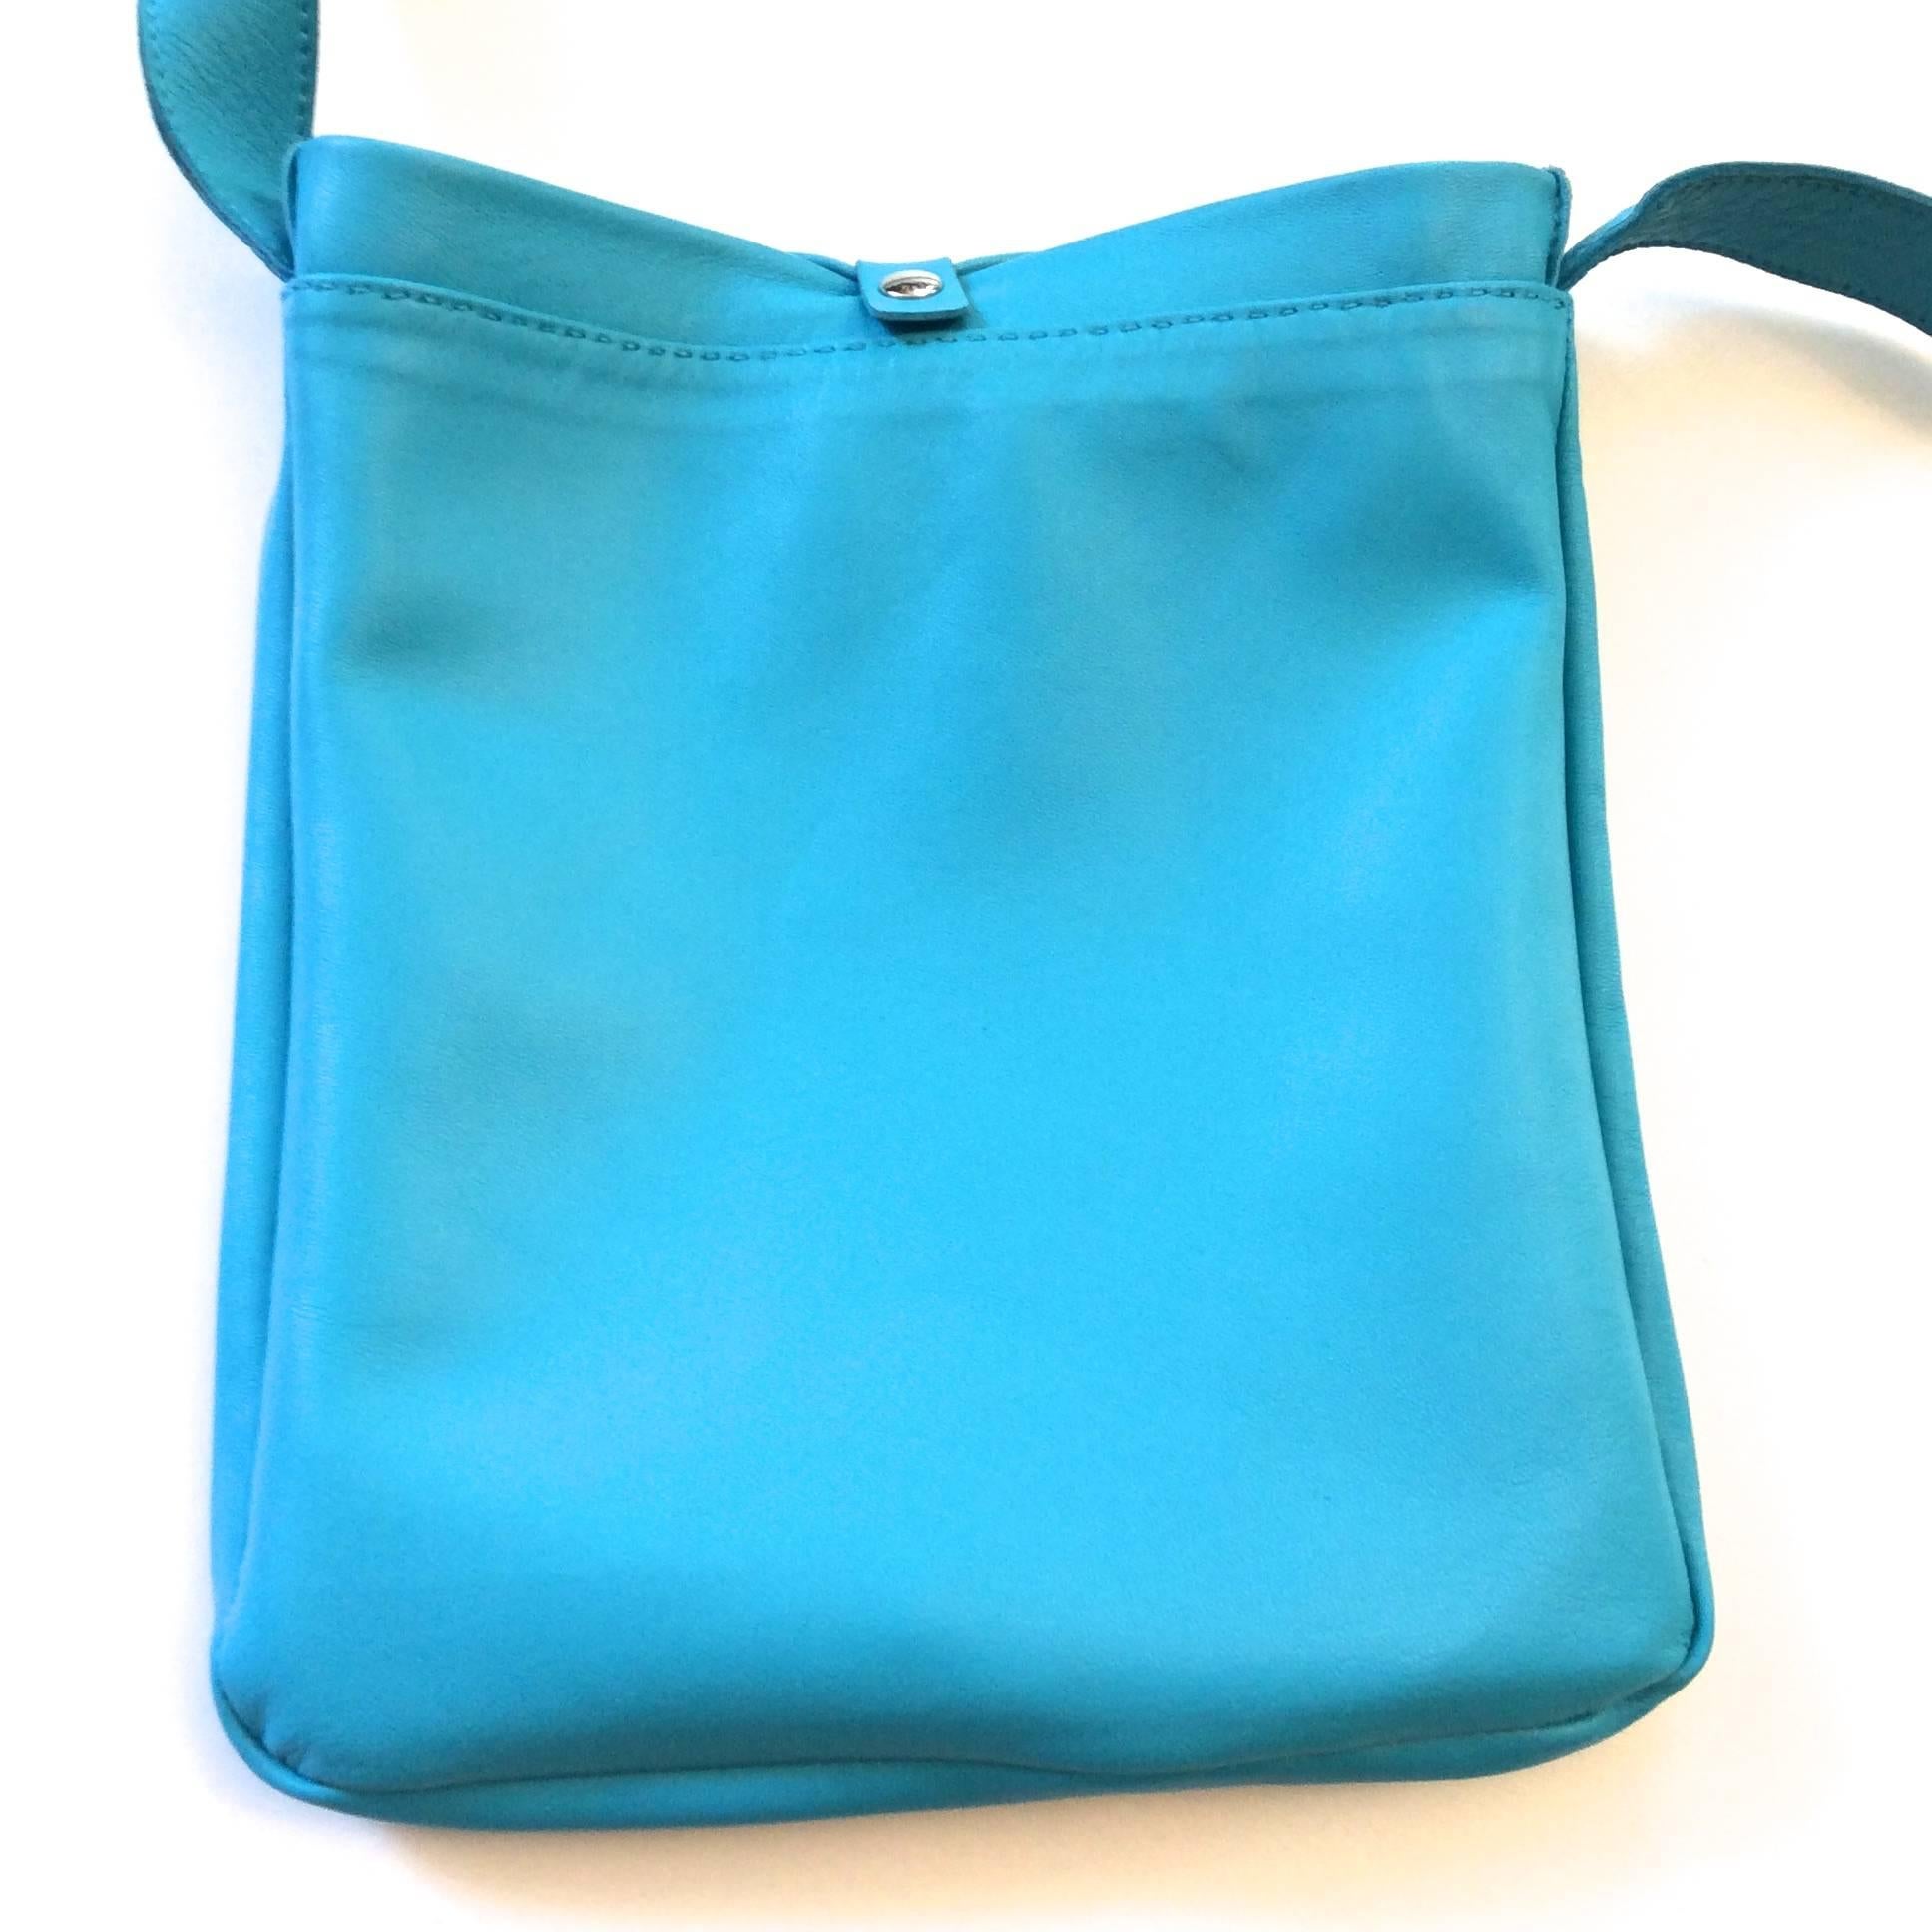 Hermes Crossbody Purse - Blue Leather  For Sale 6